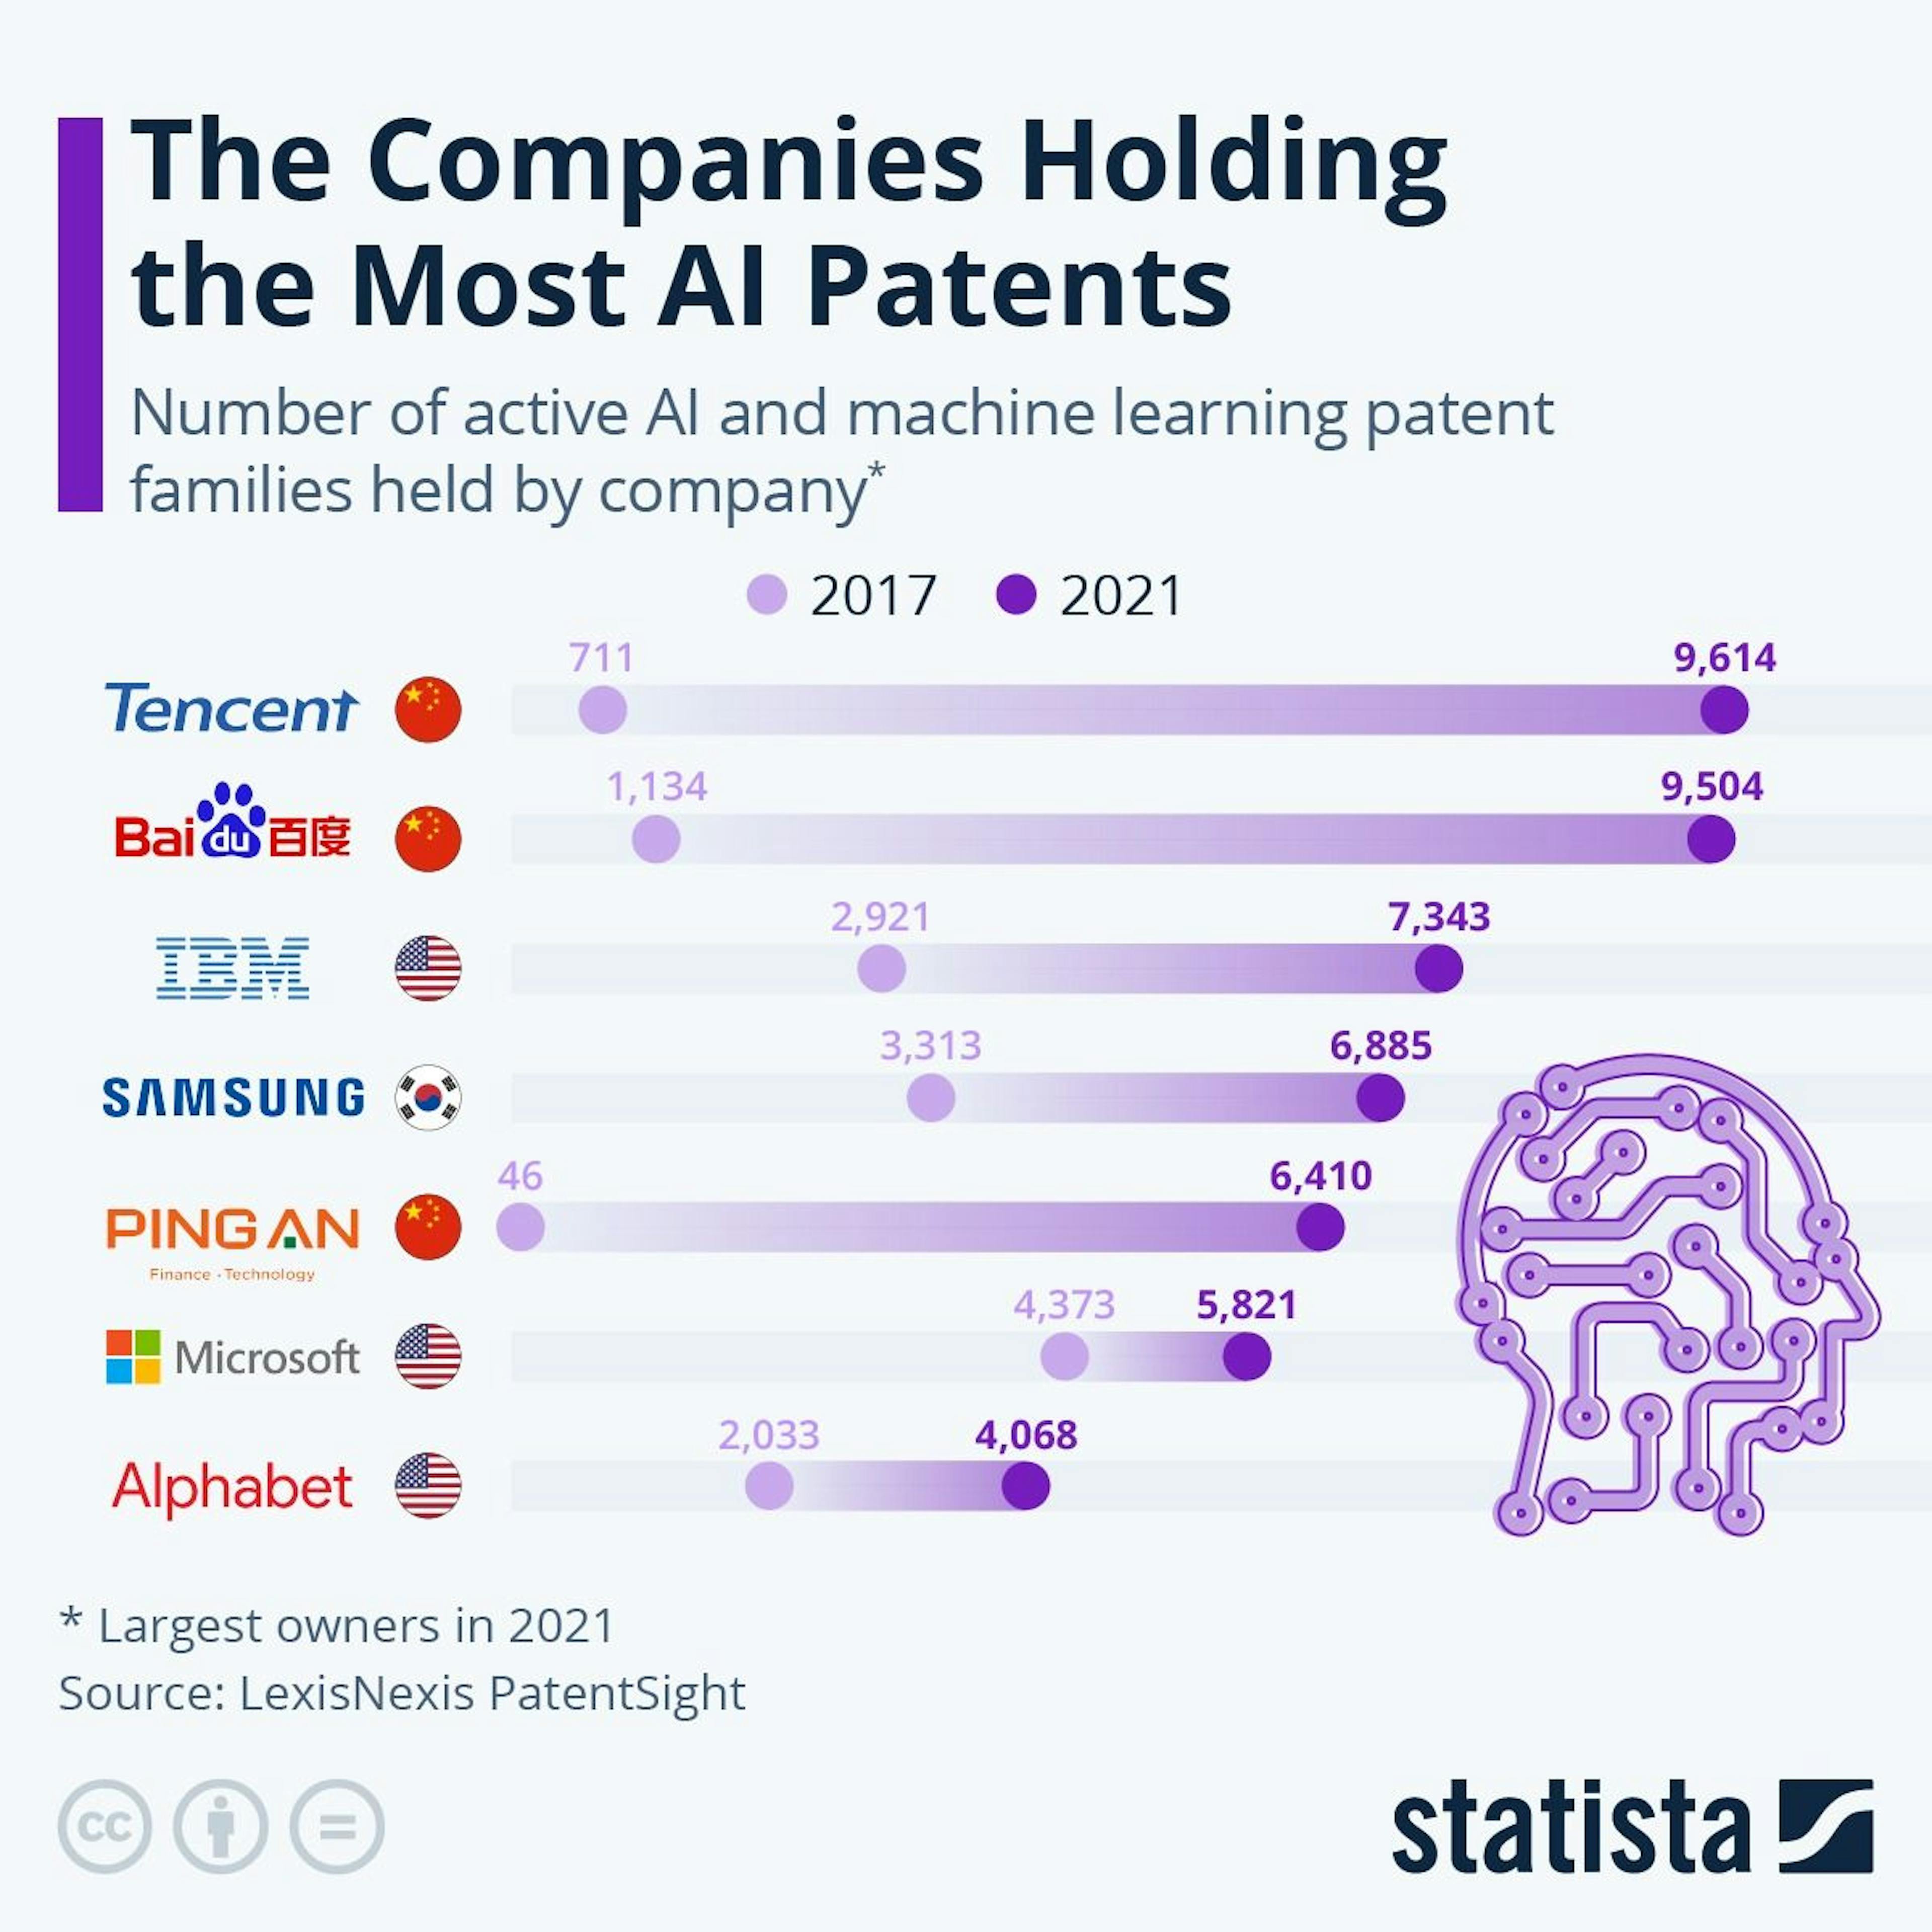 The companies with the most AI patents